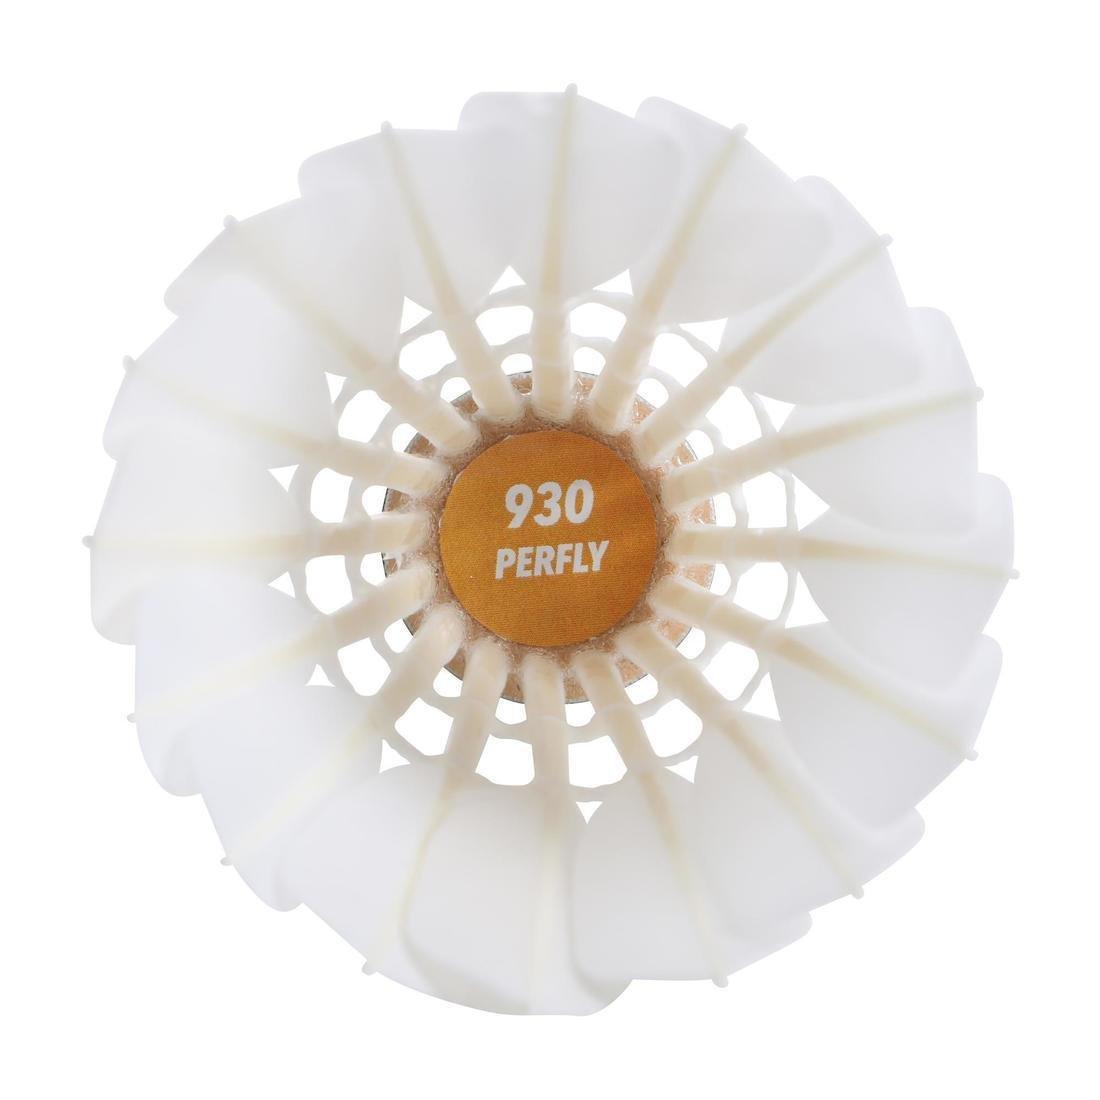 PERFLY - Feather Shuttlecock Fsc 930 Speed 77 X 12, White